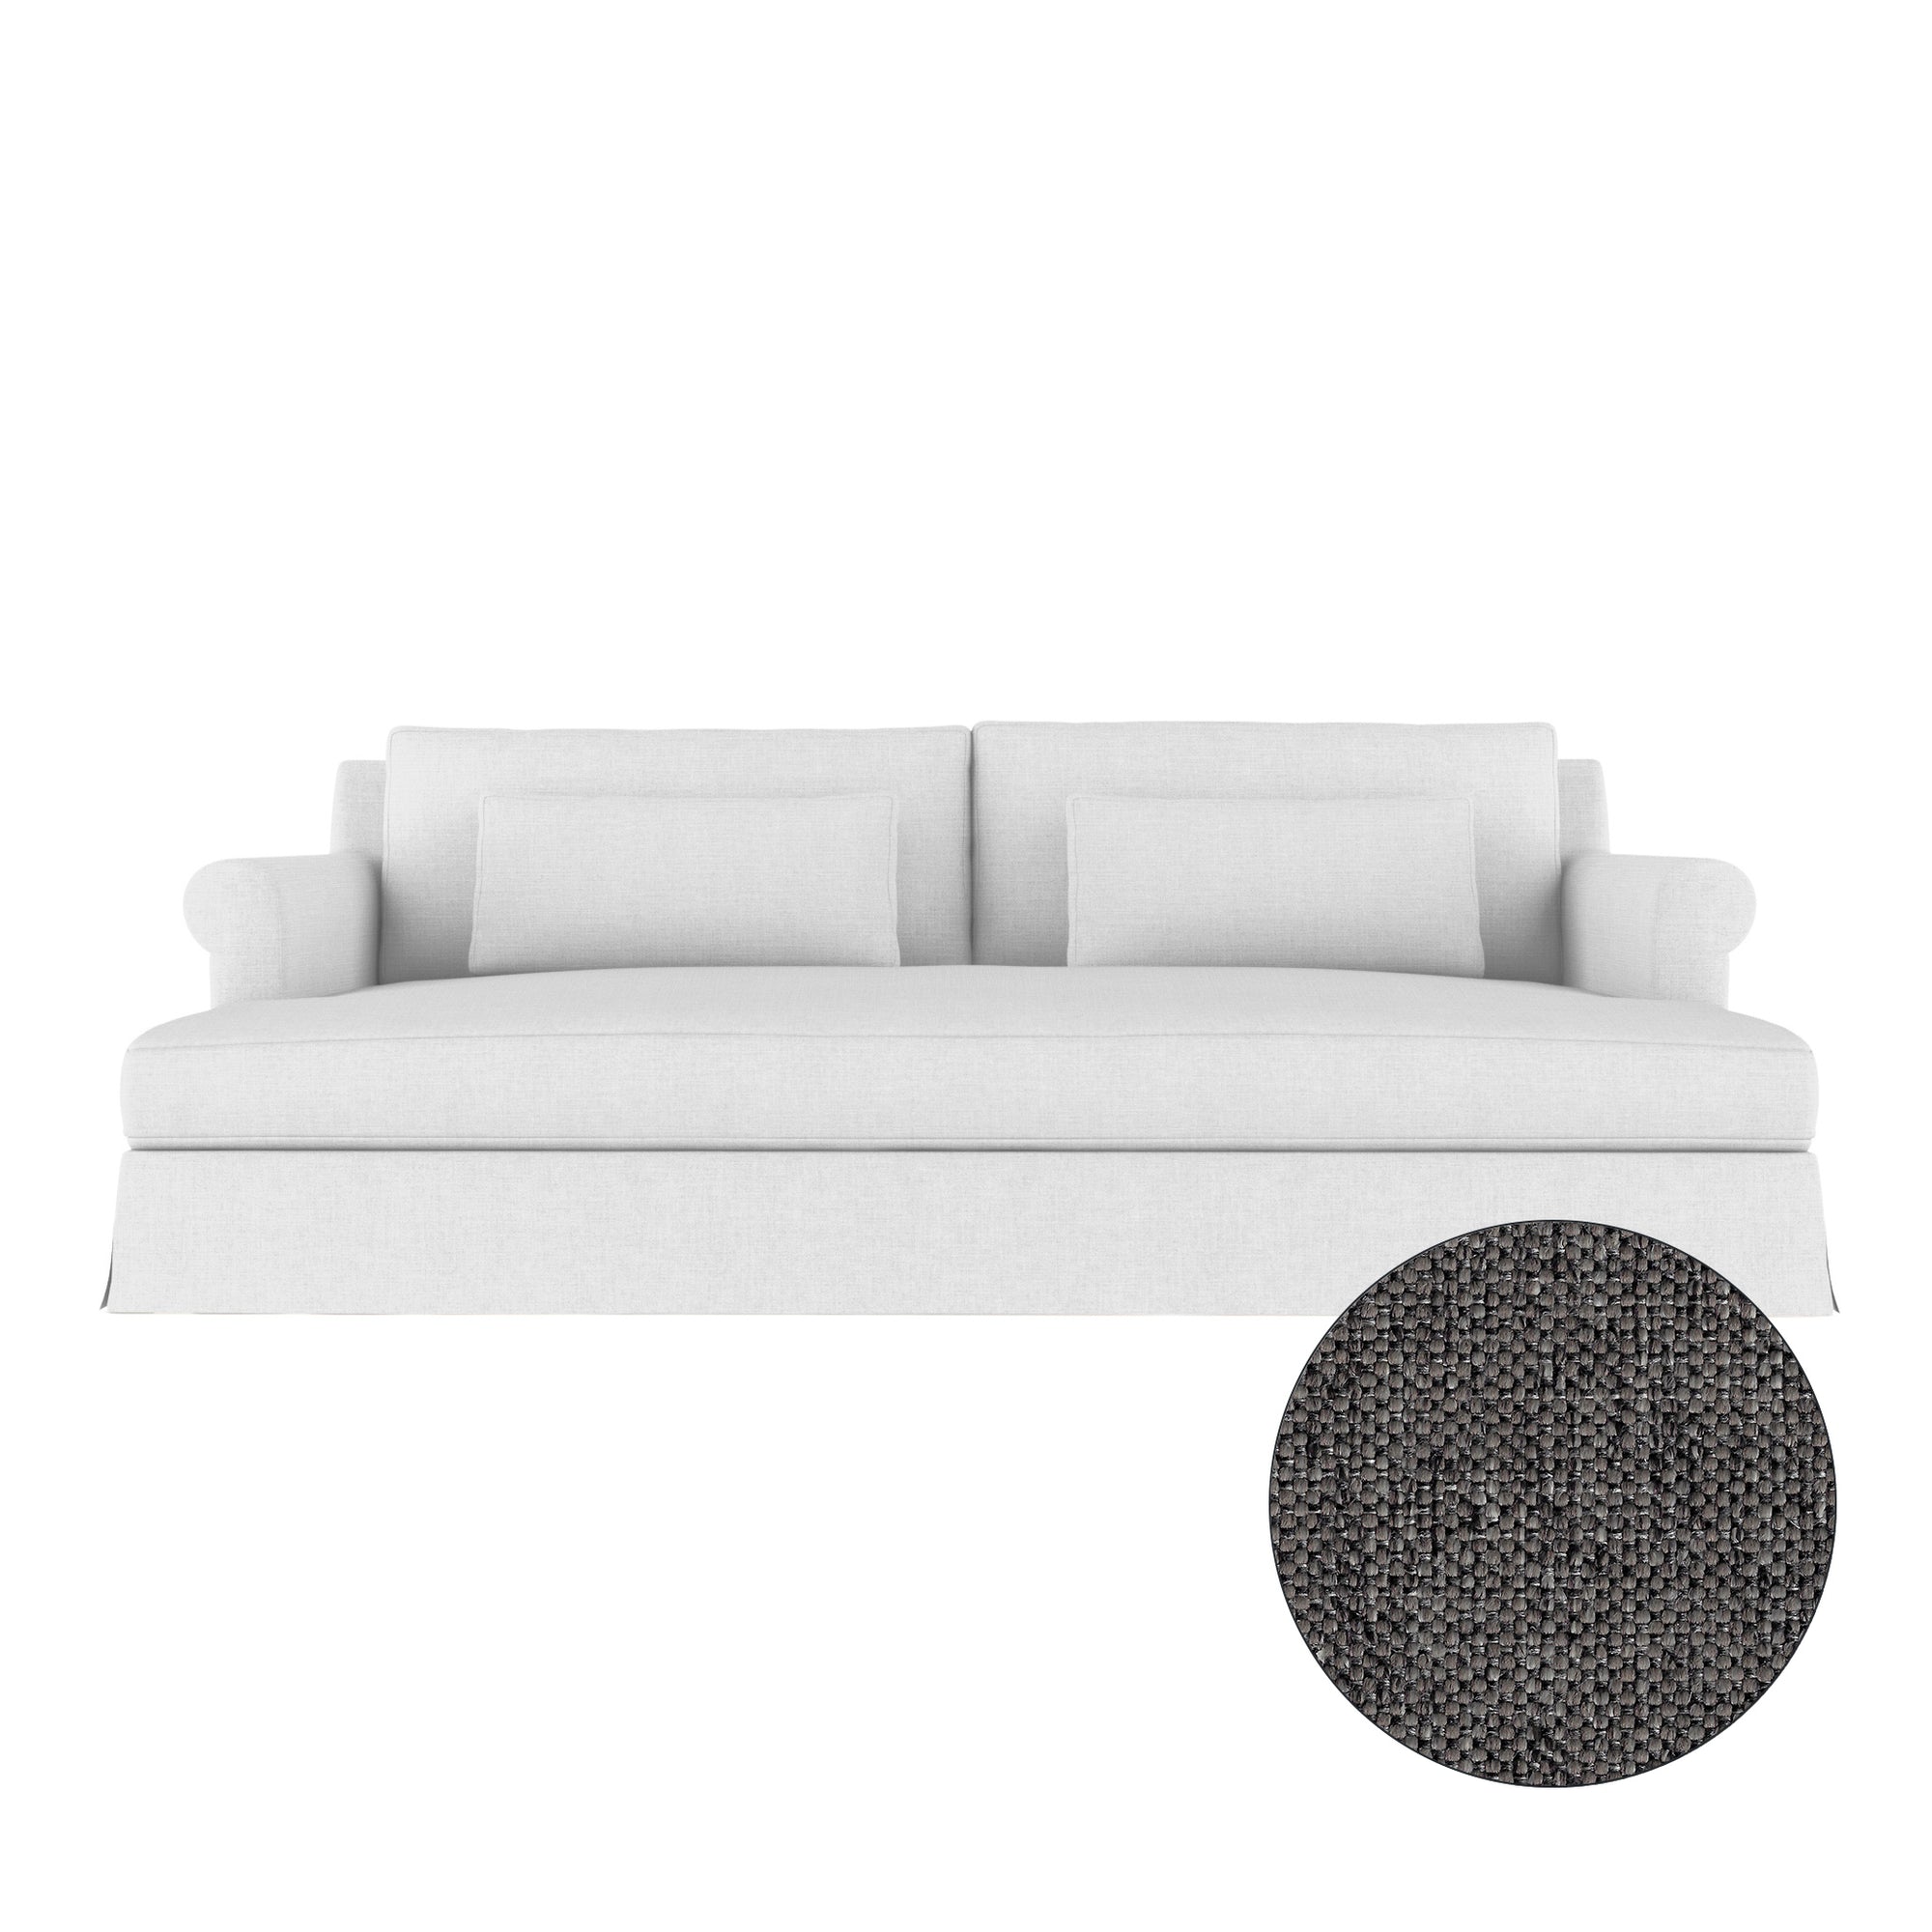 Ludlow Daybed - Graphite Pebble Weave Linen